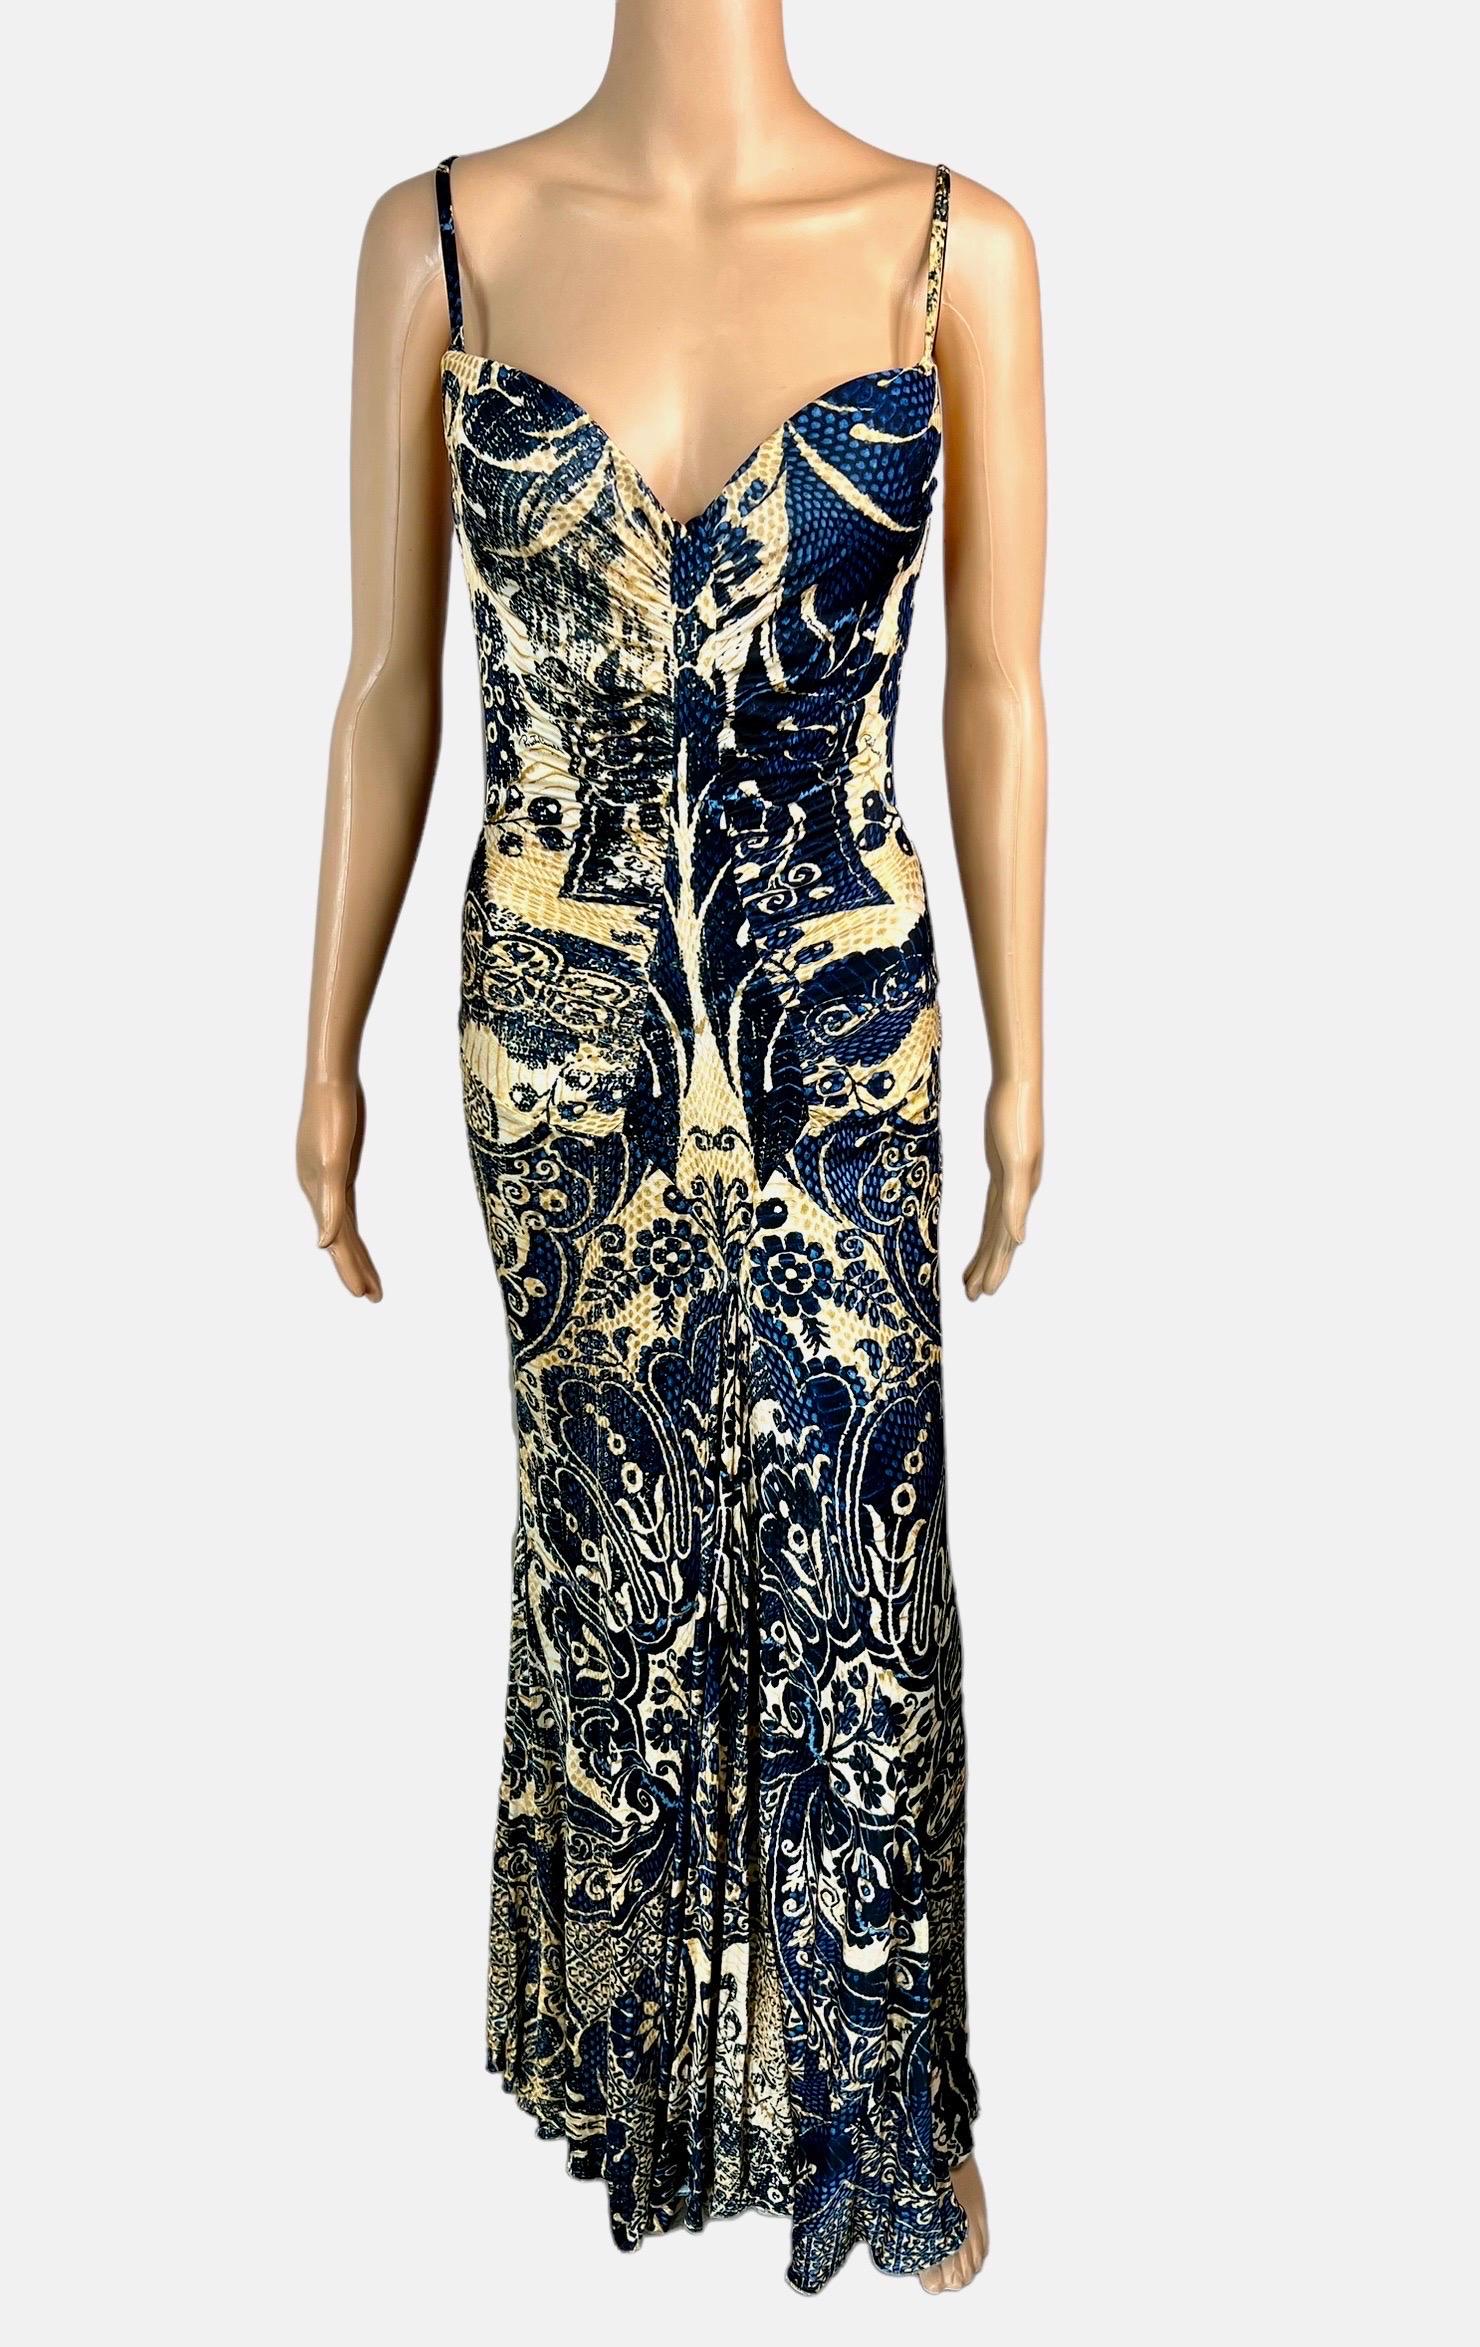 Roberto Cavalli c.2005 Bustier Bra Abstract Print Maxi Evening Dress Gown For Sale 2